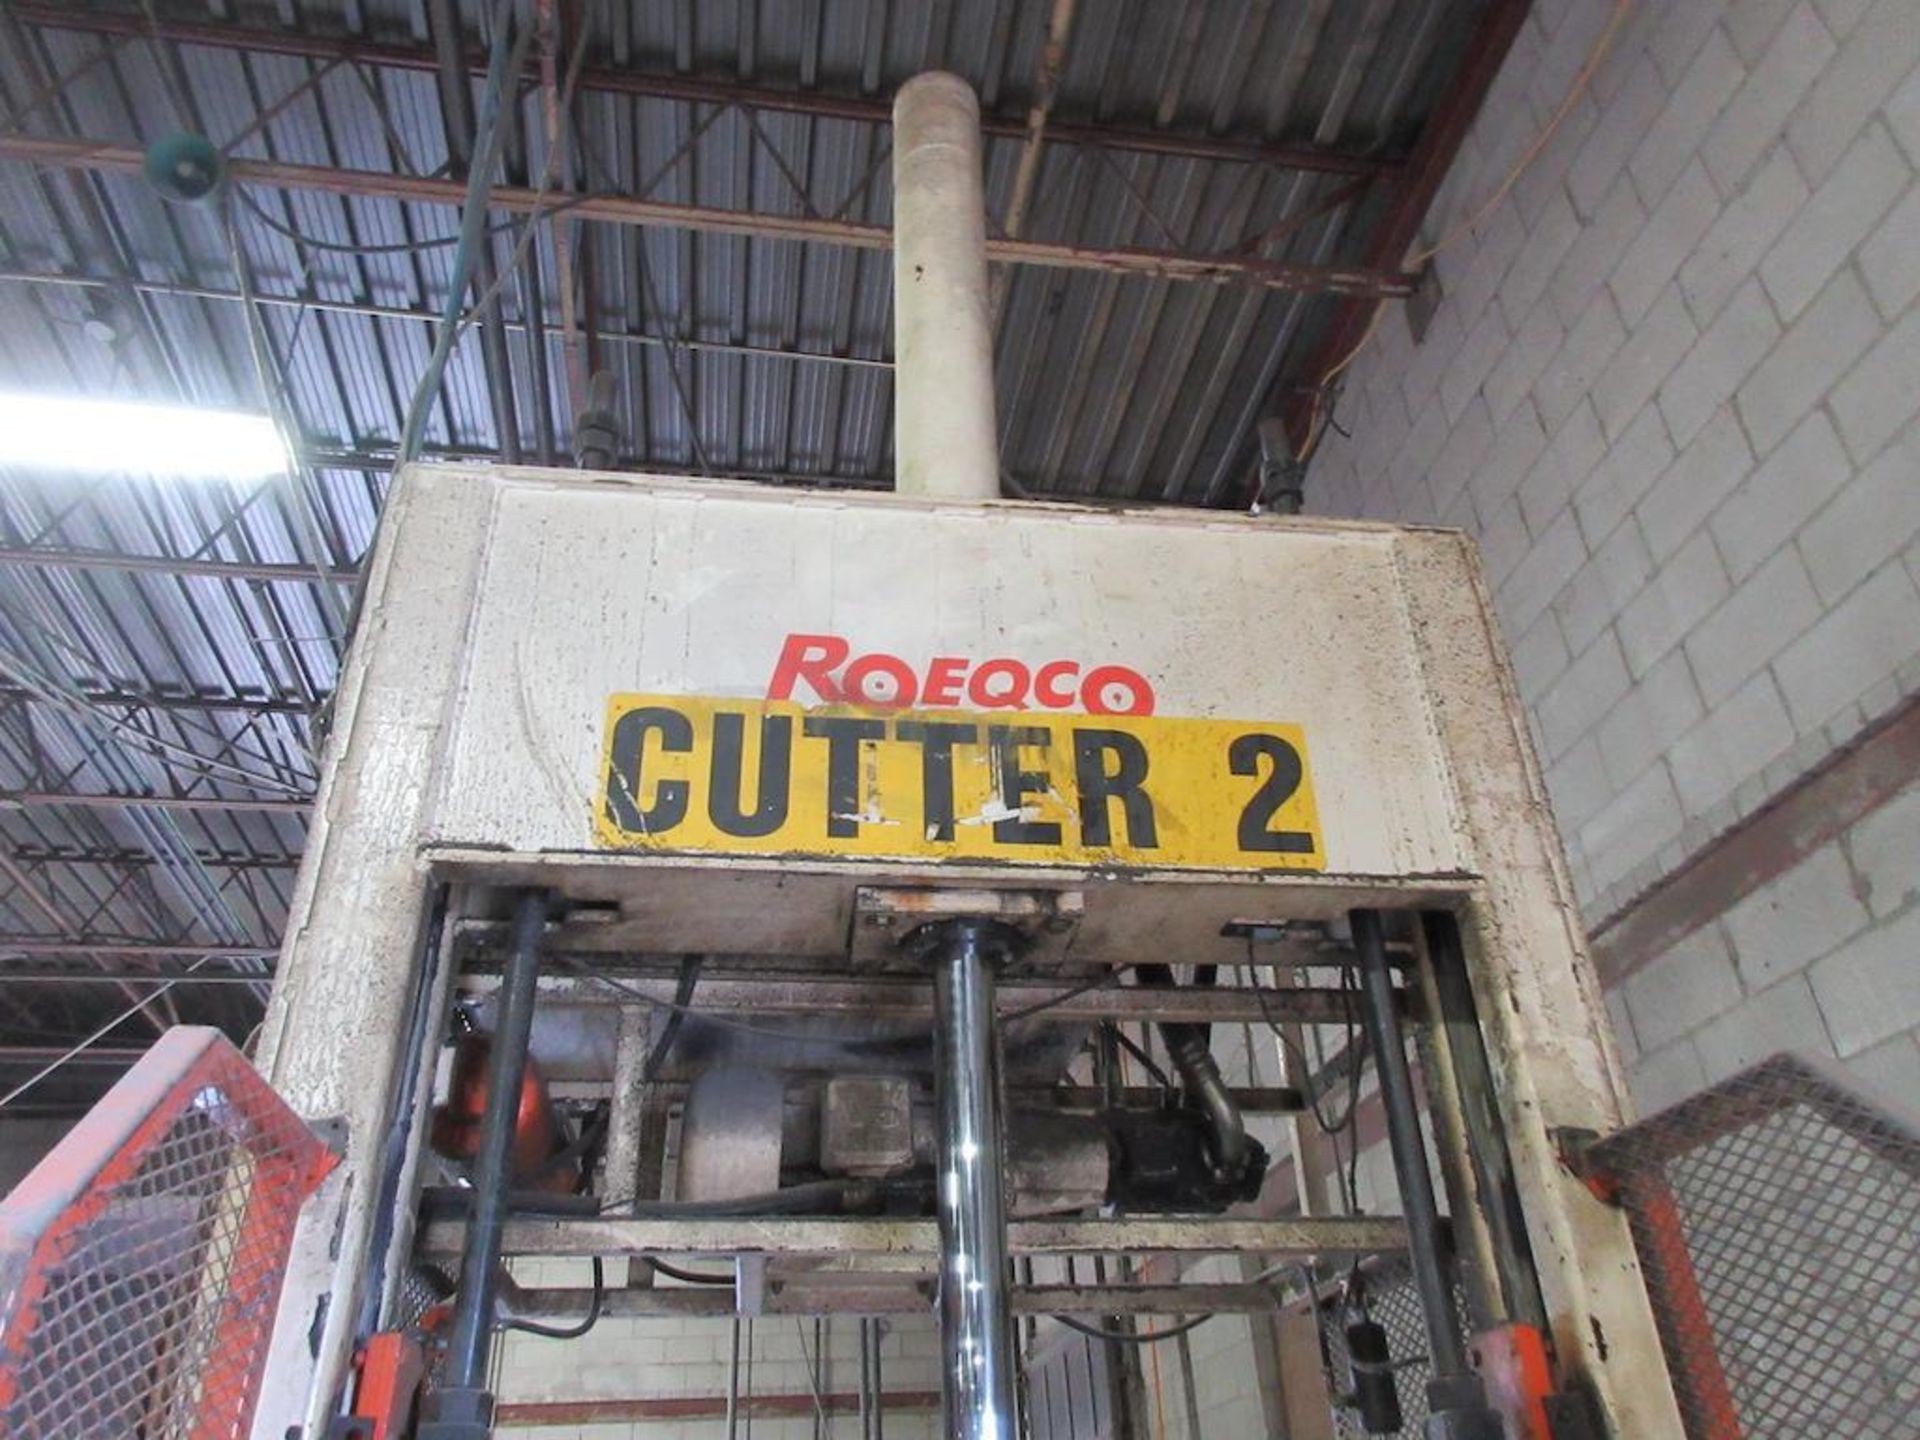 2001 ROEQCO (Rolling Equipment Company Inc) Guillotine, 5' blade, Model HS 115-66-218, sn 115-01-01- - Image 3 of 8